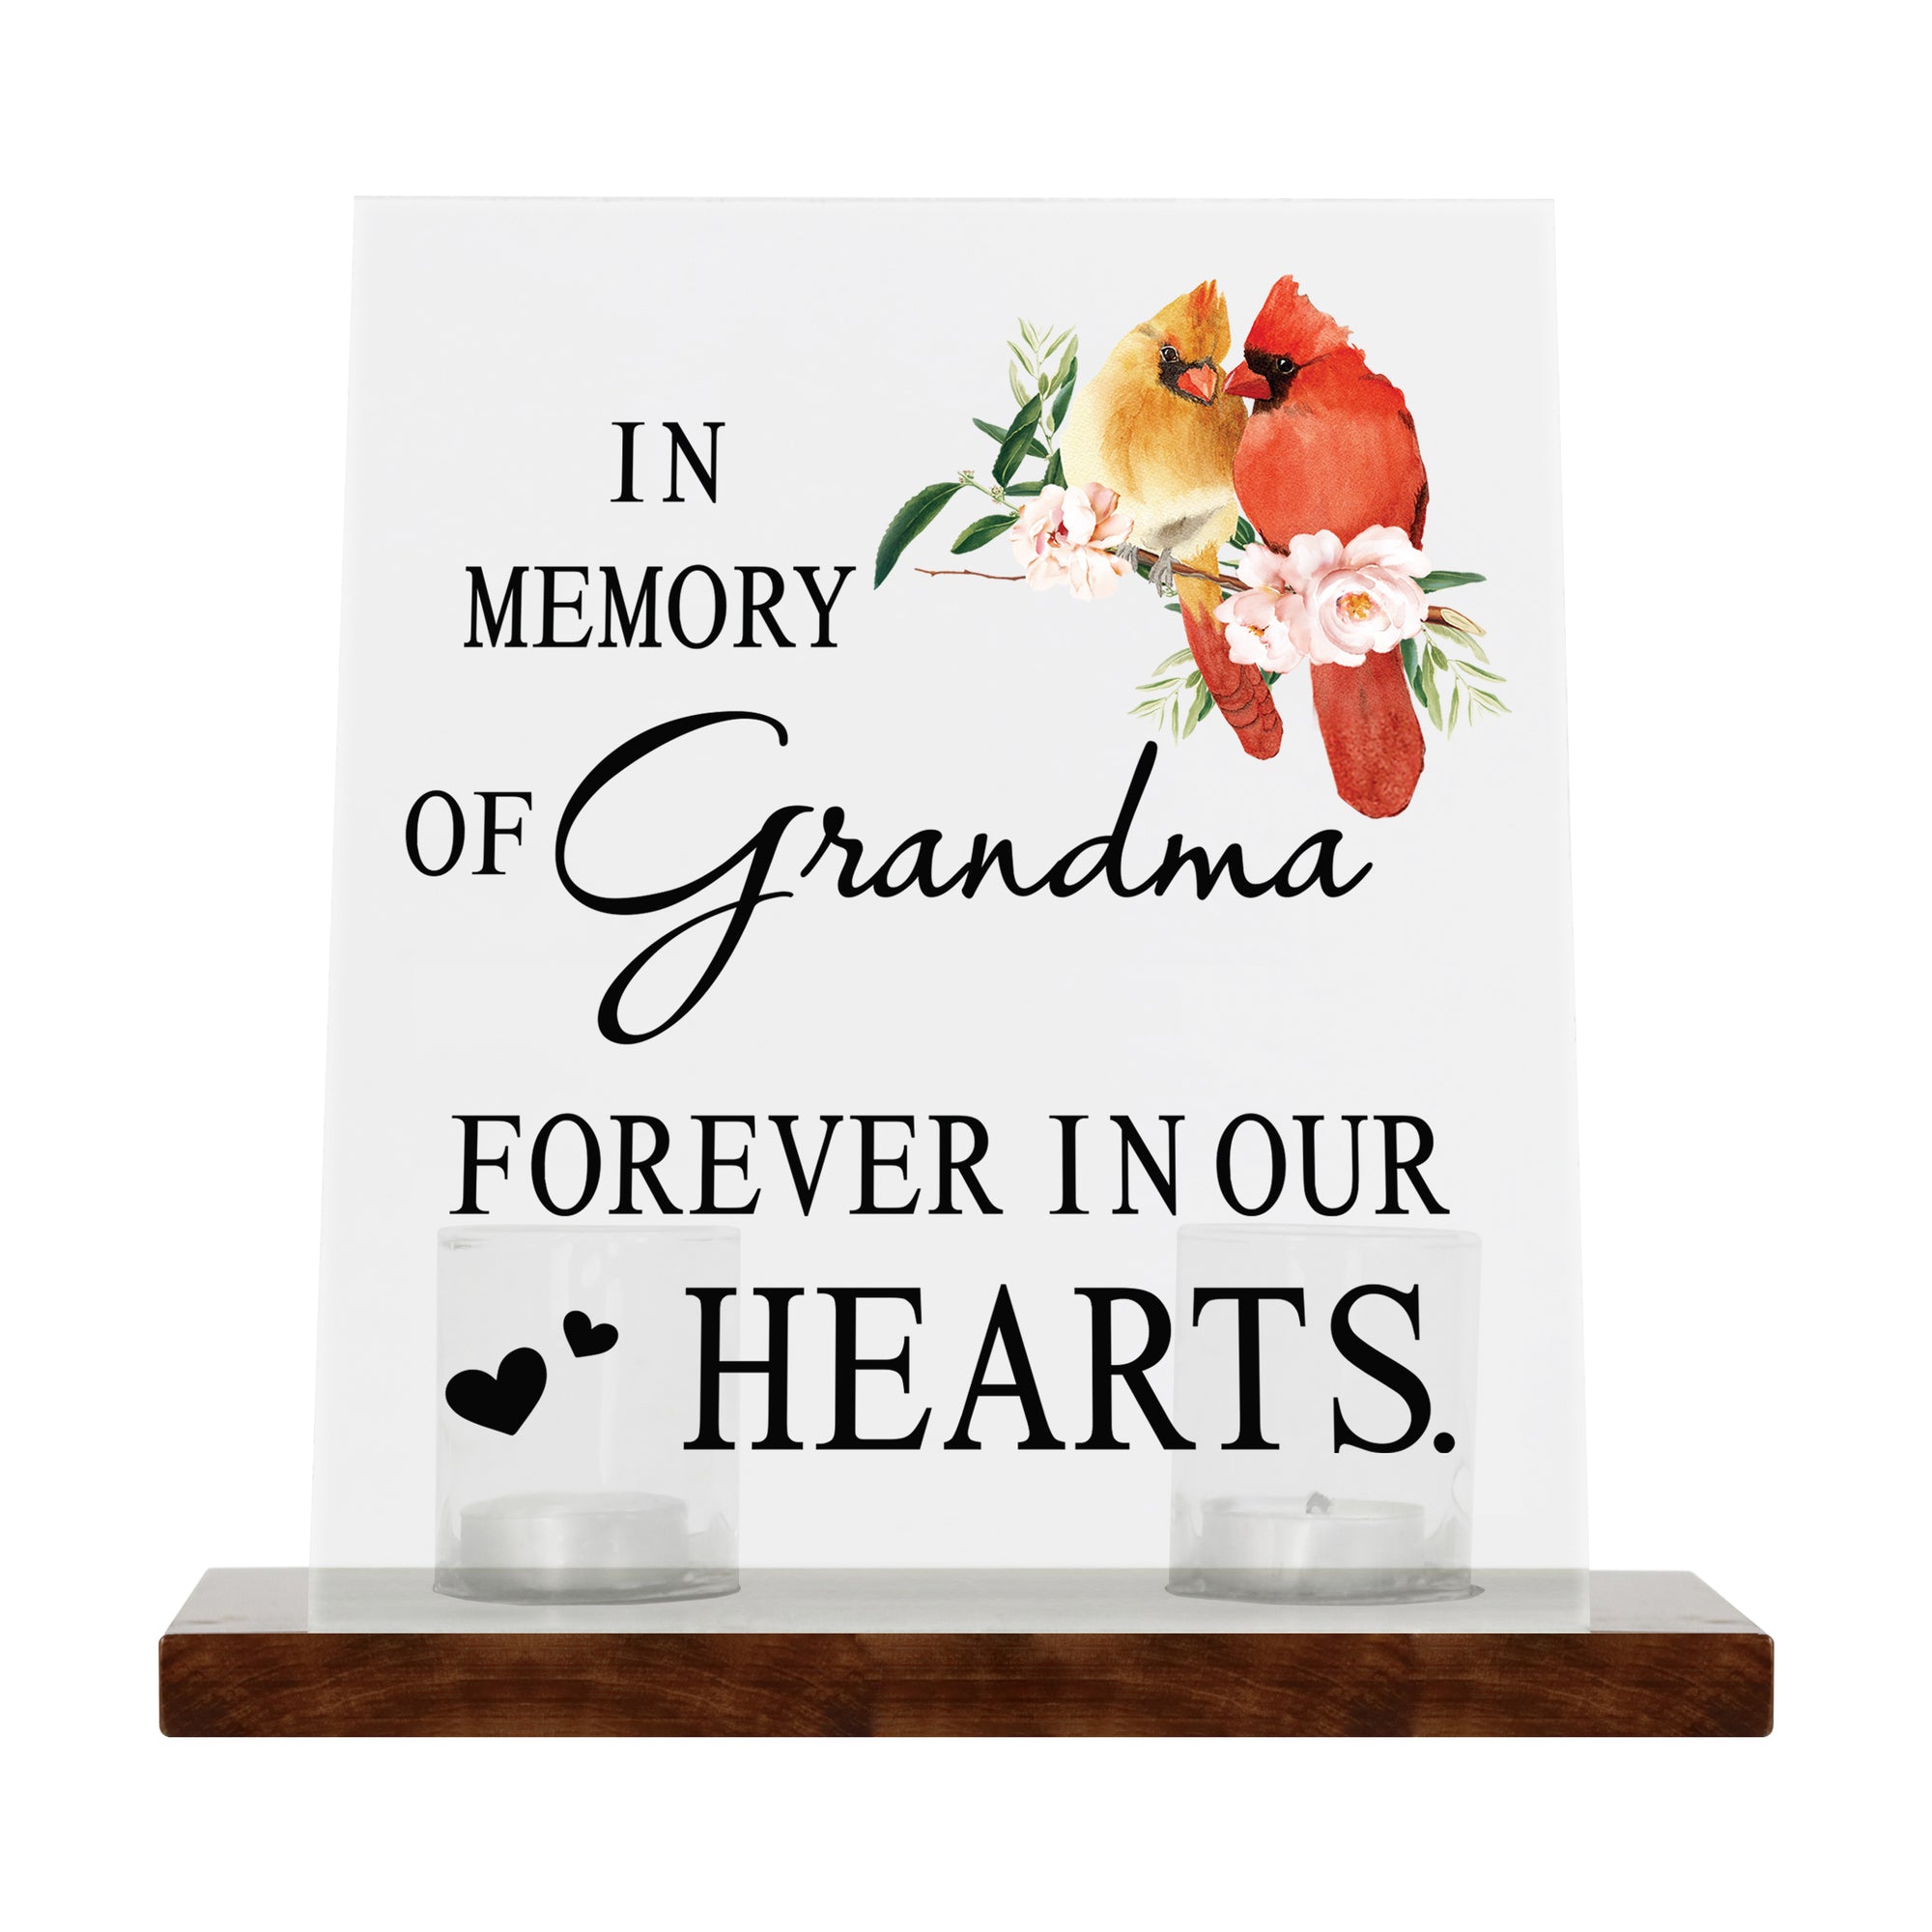 LifeSong Memorials Vintage Memorial Cardinal Acrylic Sign Candle Holder With Wood Base And Glass Votives For Home Decor | In Memory Of Grandma. Acrylic candle holders, Vintage acrylic candle holders, glass candle holders for Living Room, Bedroom, Kitchen, Dining Room, and Entryways decor perfect memorial bereavement keepsake gift ideas for Family & Friends.